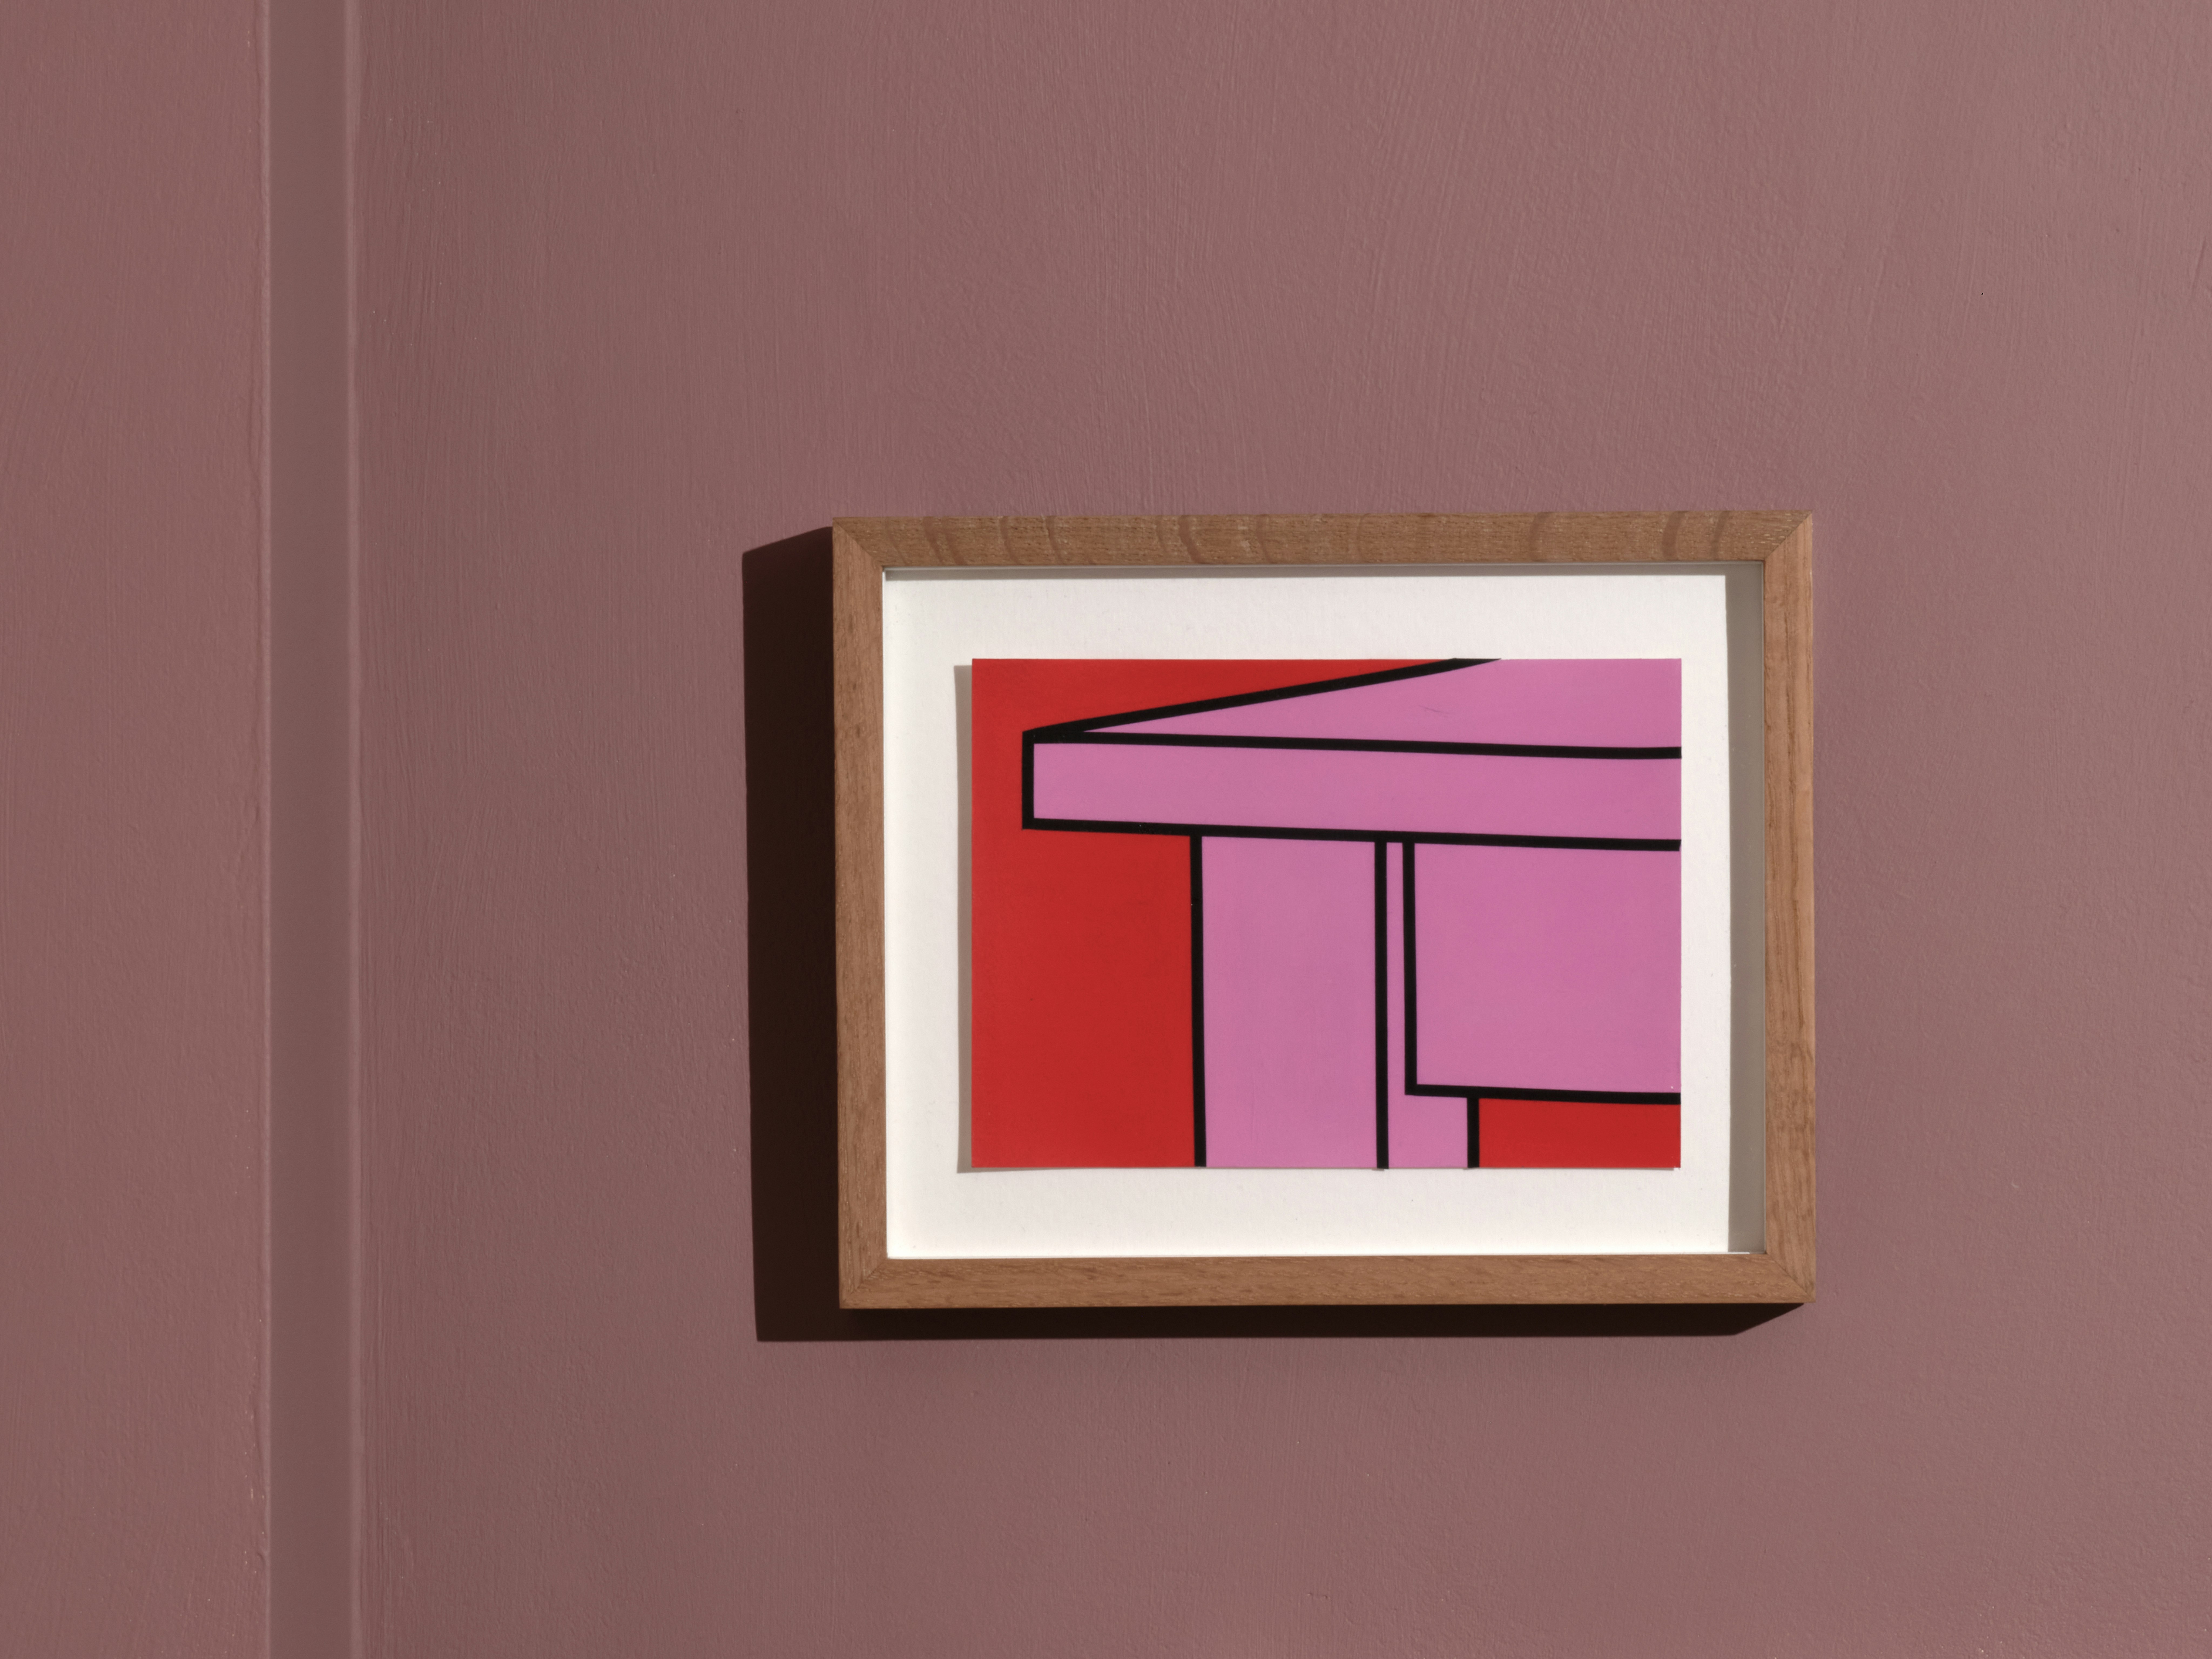 Installation photo of framed collage drawing by Michael Craig-Martin depicting a pop-coloured table in pink with black outline on bright red background.